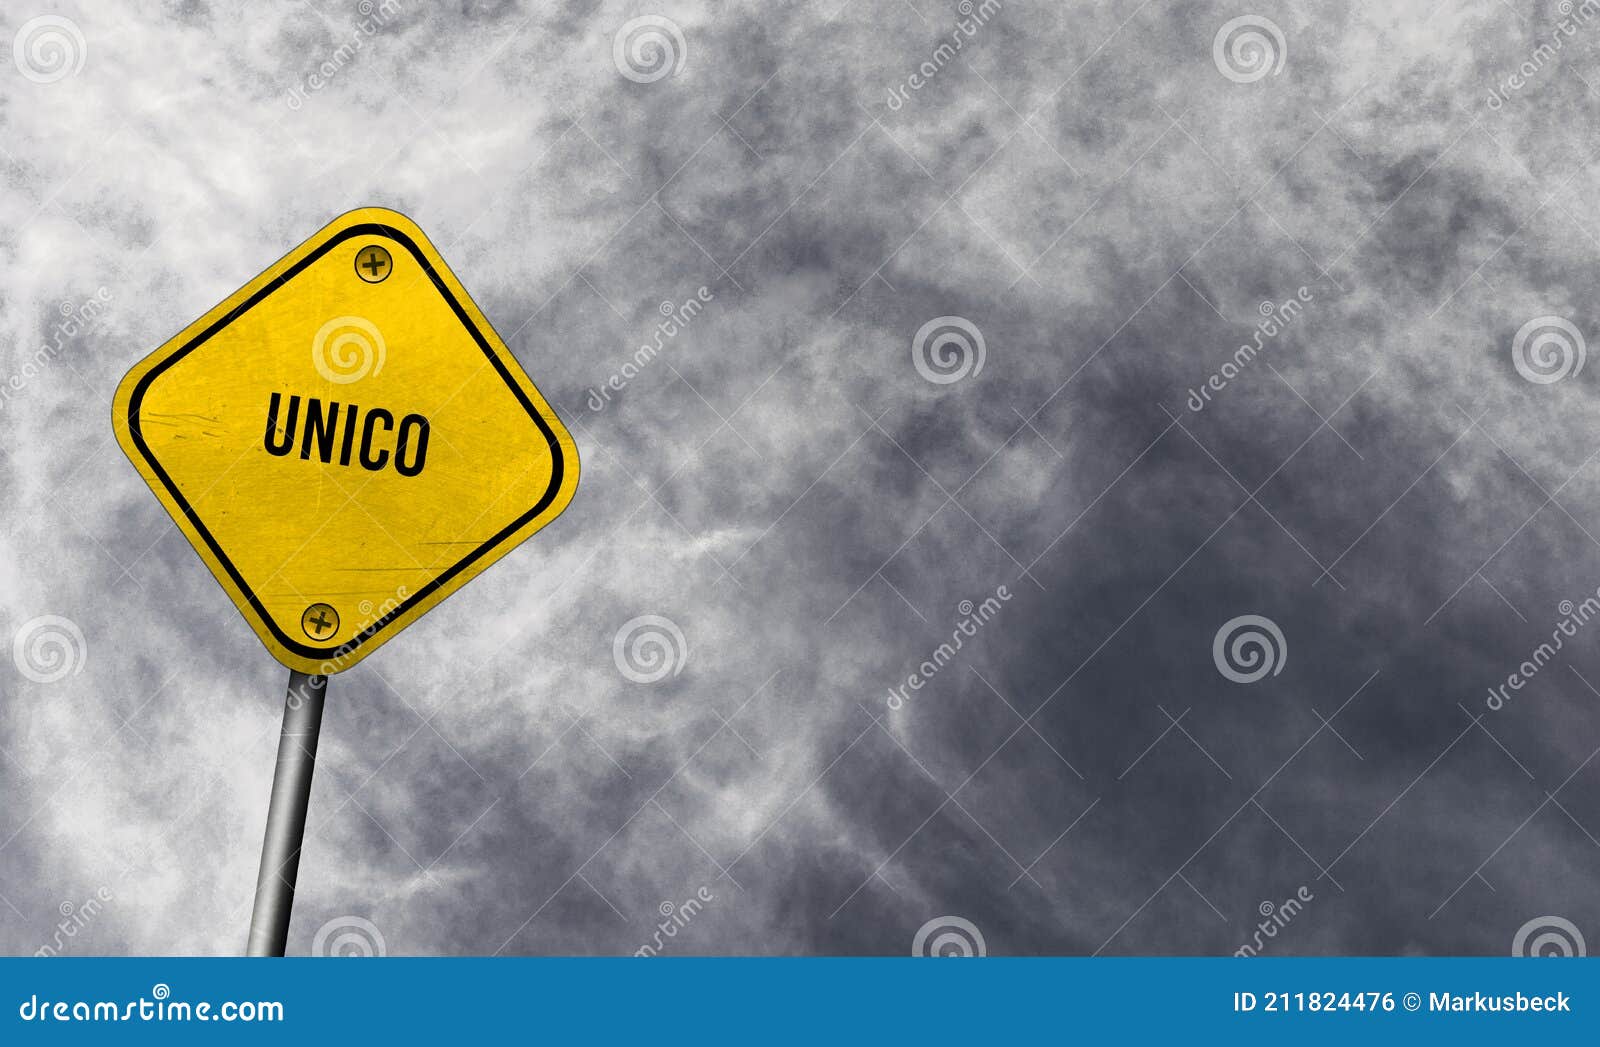 unico - yellow sign with cloudy background